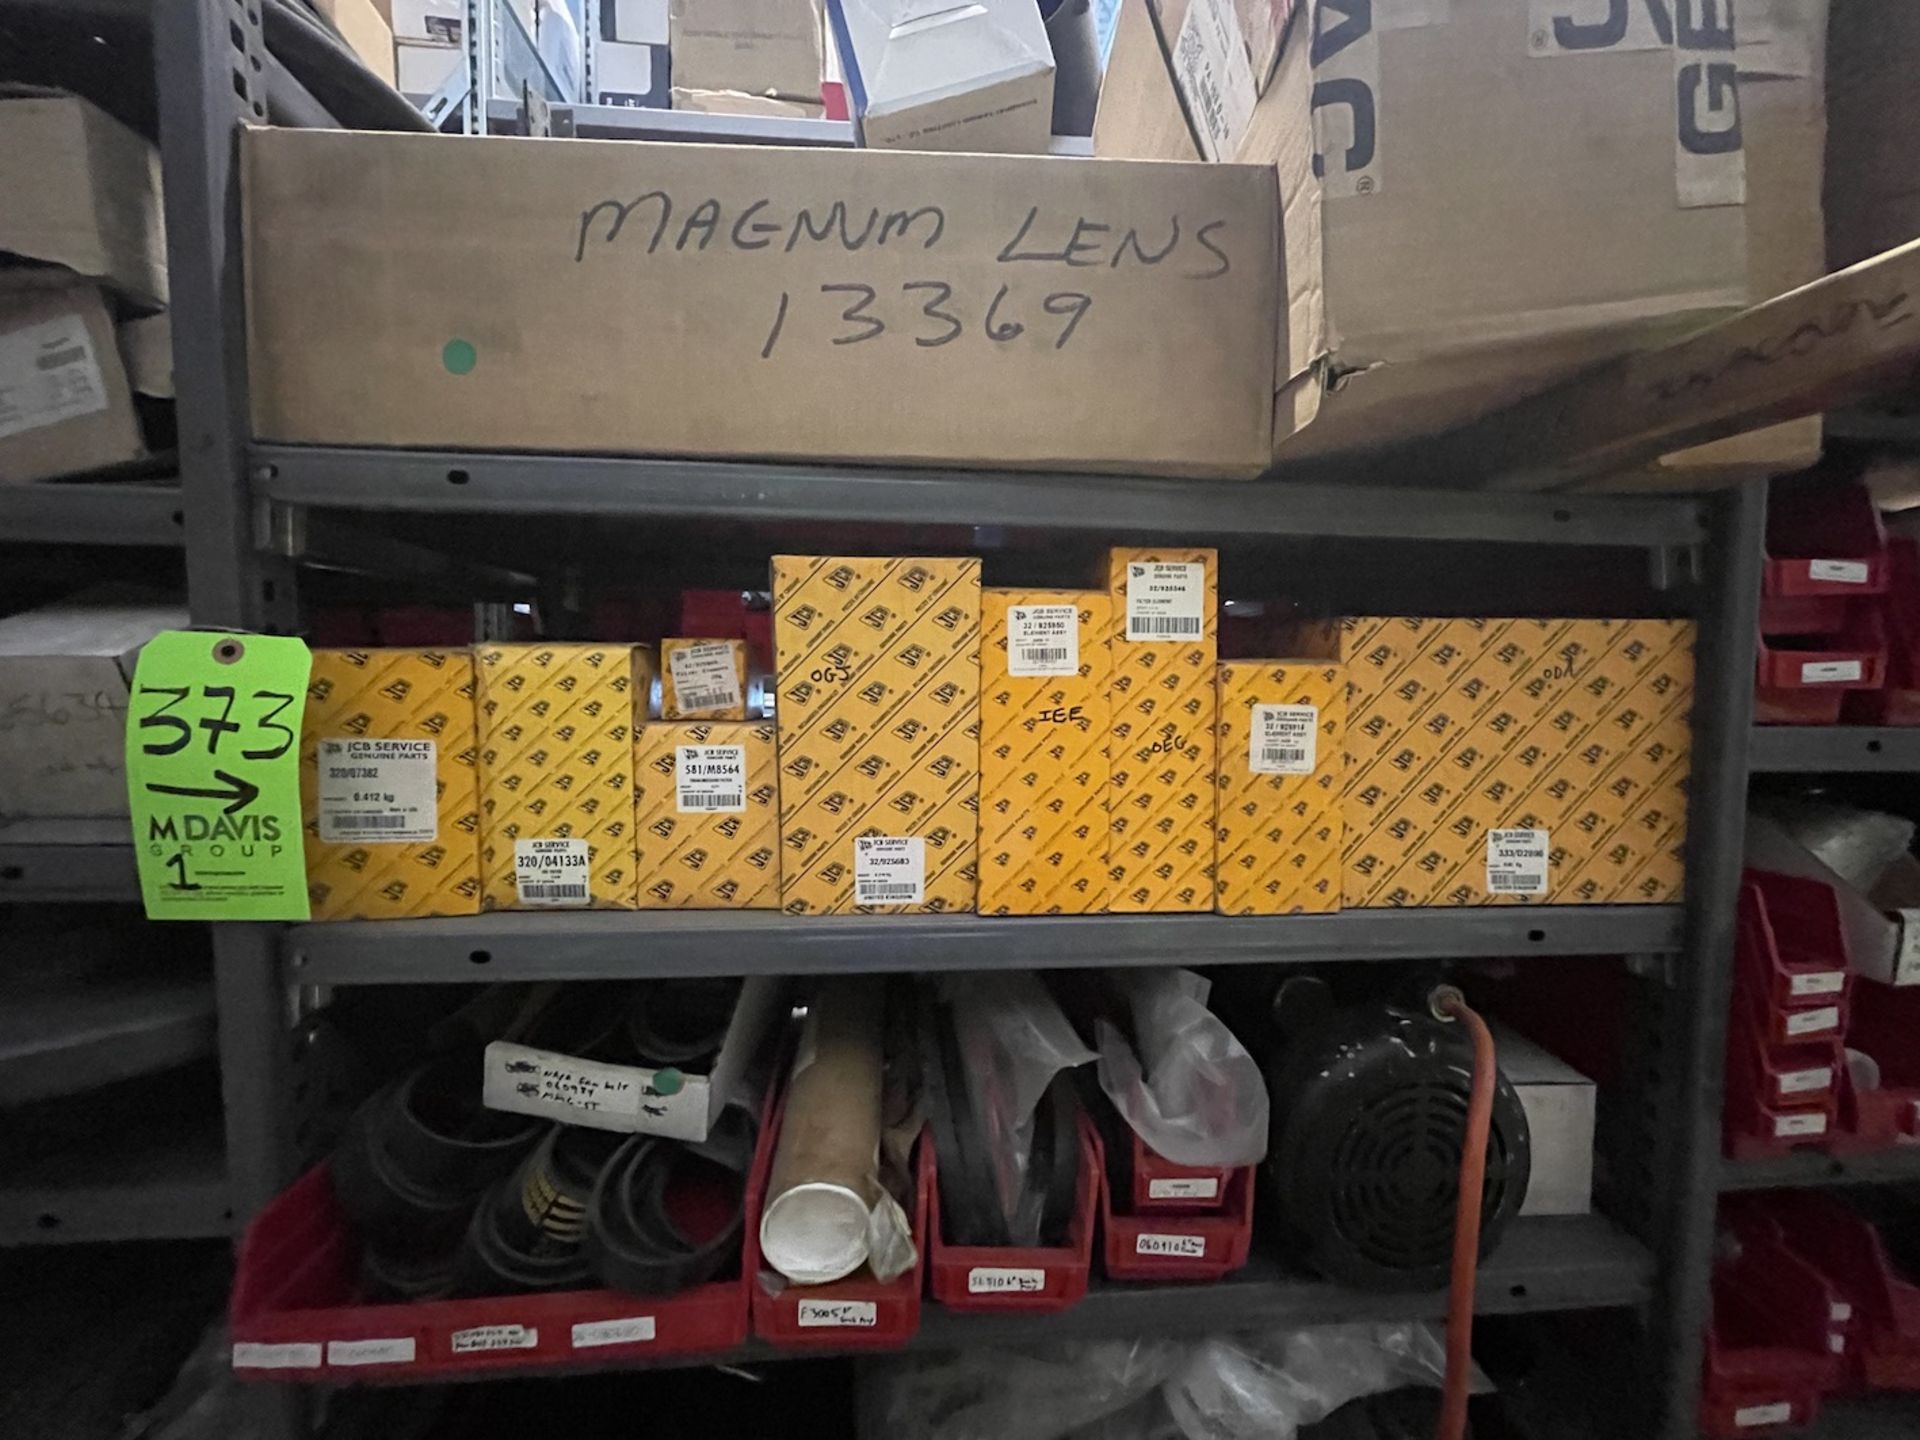 ASSORTED JCB PARTS AND MRO, ELEMENT ASSEMBLIES, FILTERS, ETC (ALL PURCHASES MUST BE PAID FOR AND